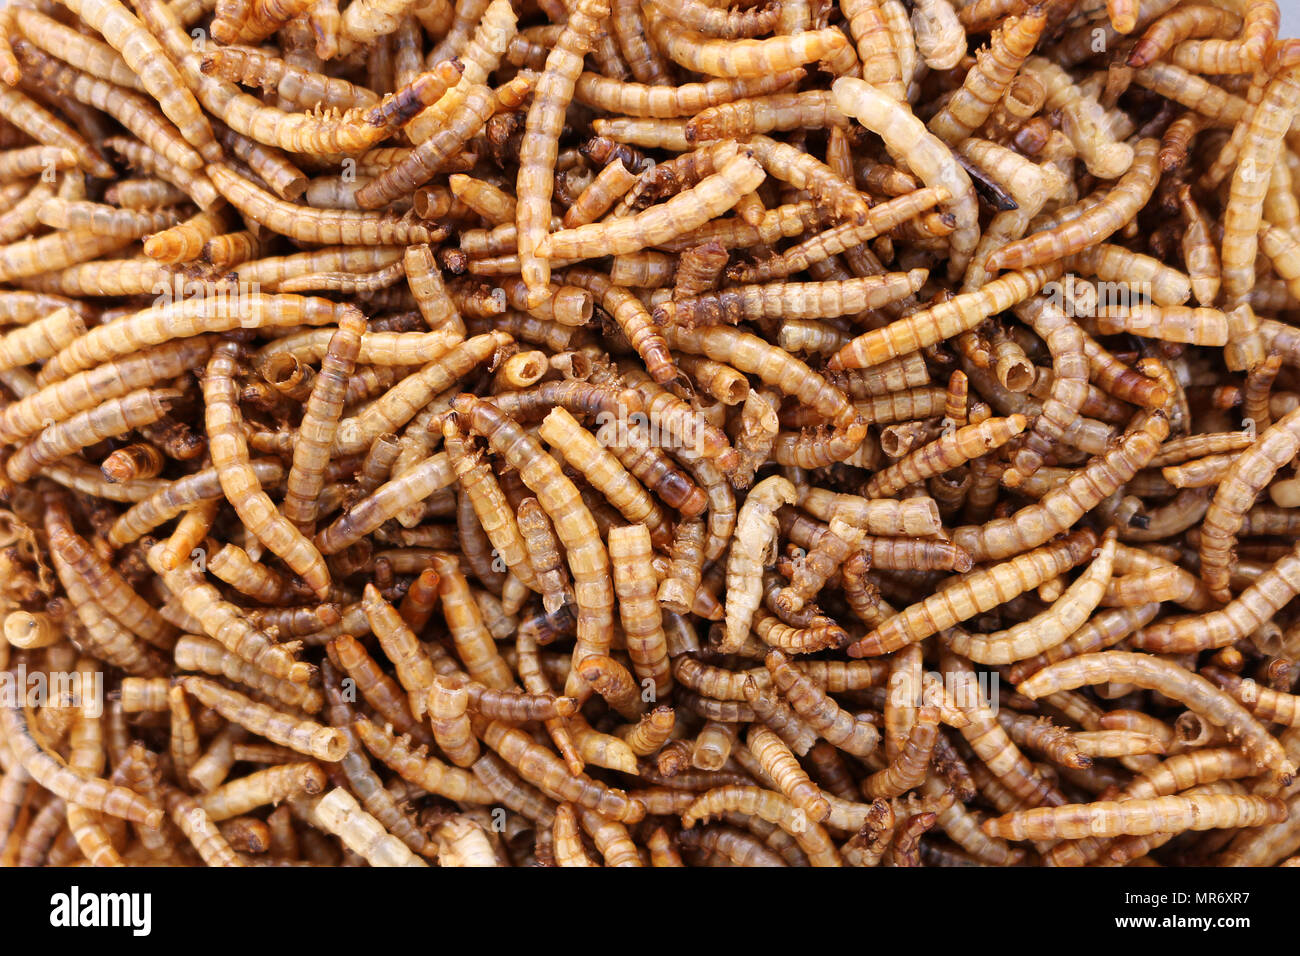 Dried Meal Worms Stock Photo